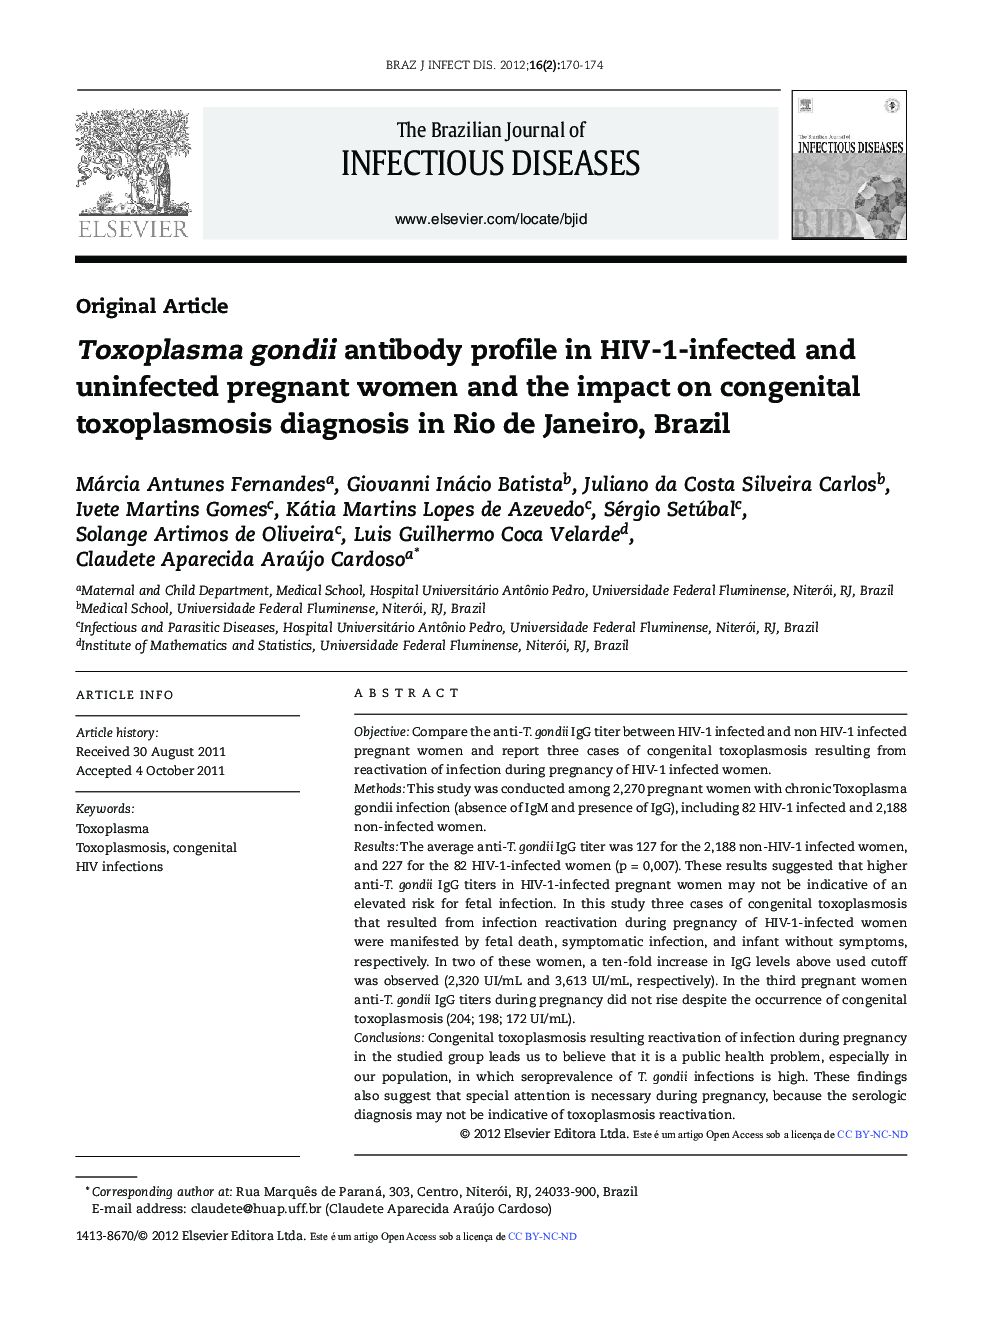 Toxoplasma gondii antibody profile in HIV-1-infected and uninfected pregnant women and the impact on congenital toxoplasmosis diagnosis in Rio de Janeiro, Brazil